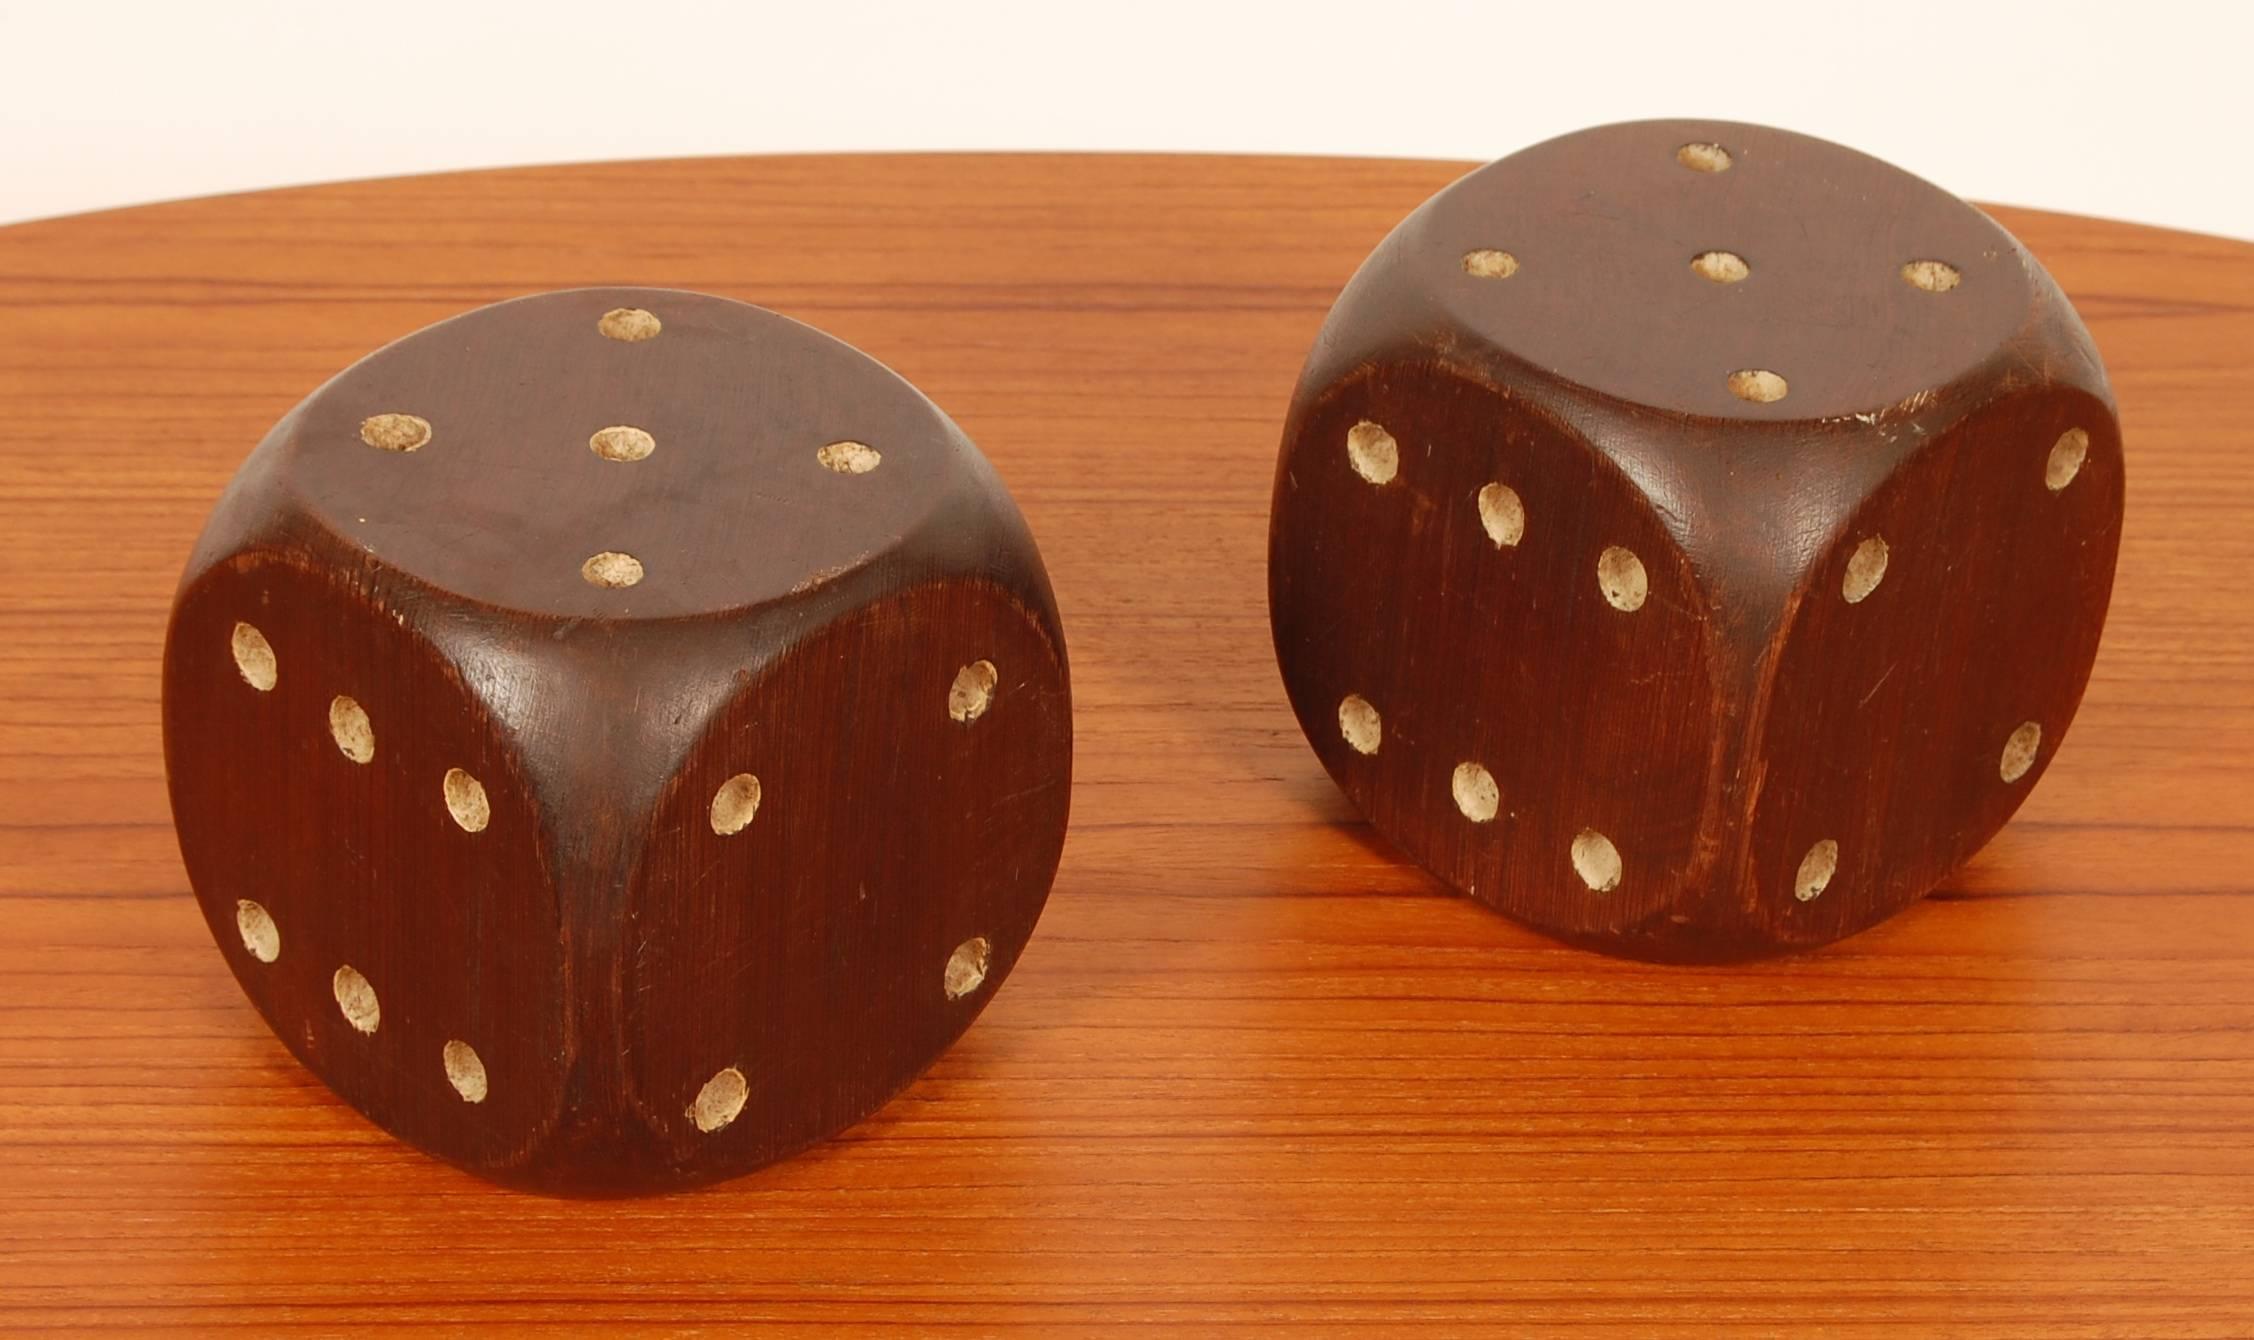 Large handmade wooden dice with a Folk Art sensibility. Crafted out of solid blocks of pine then stained and painted with a nice overall patina to the surfaces. Can be used either as bookends or as a decorative objects because of their scale.